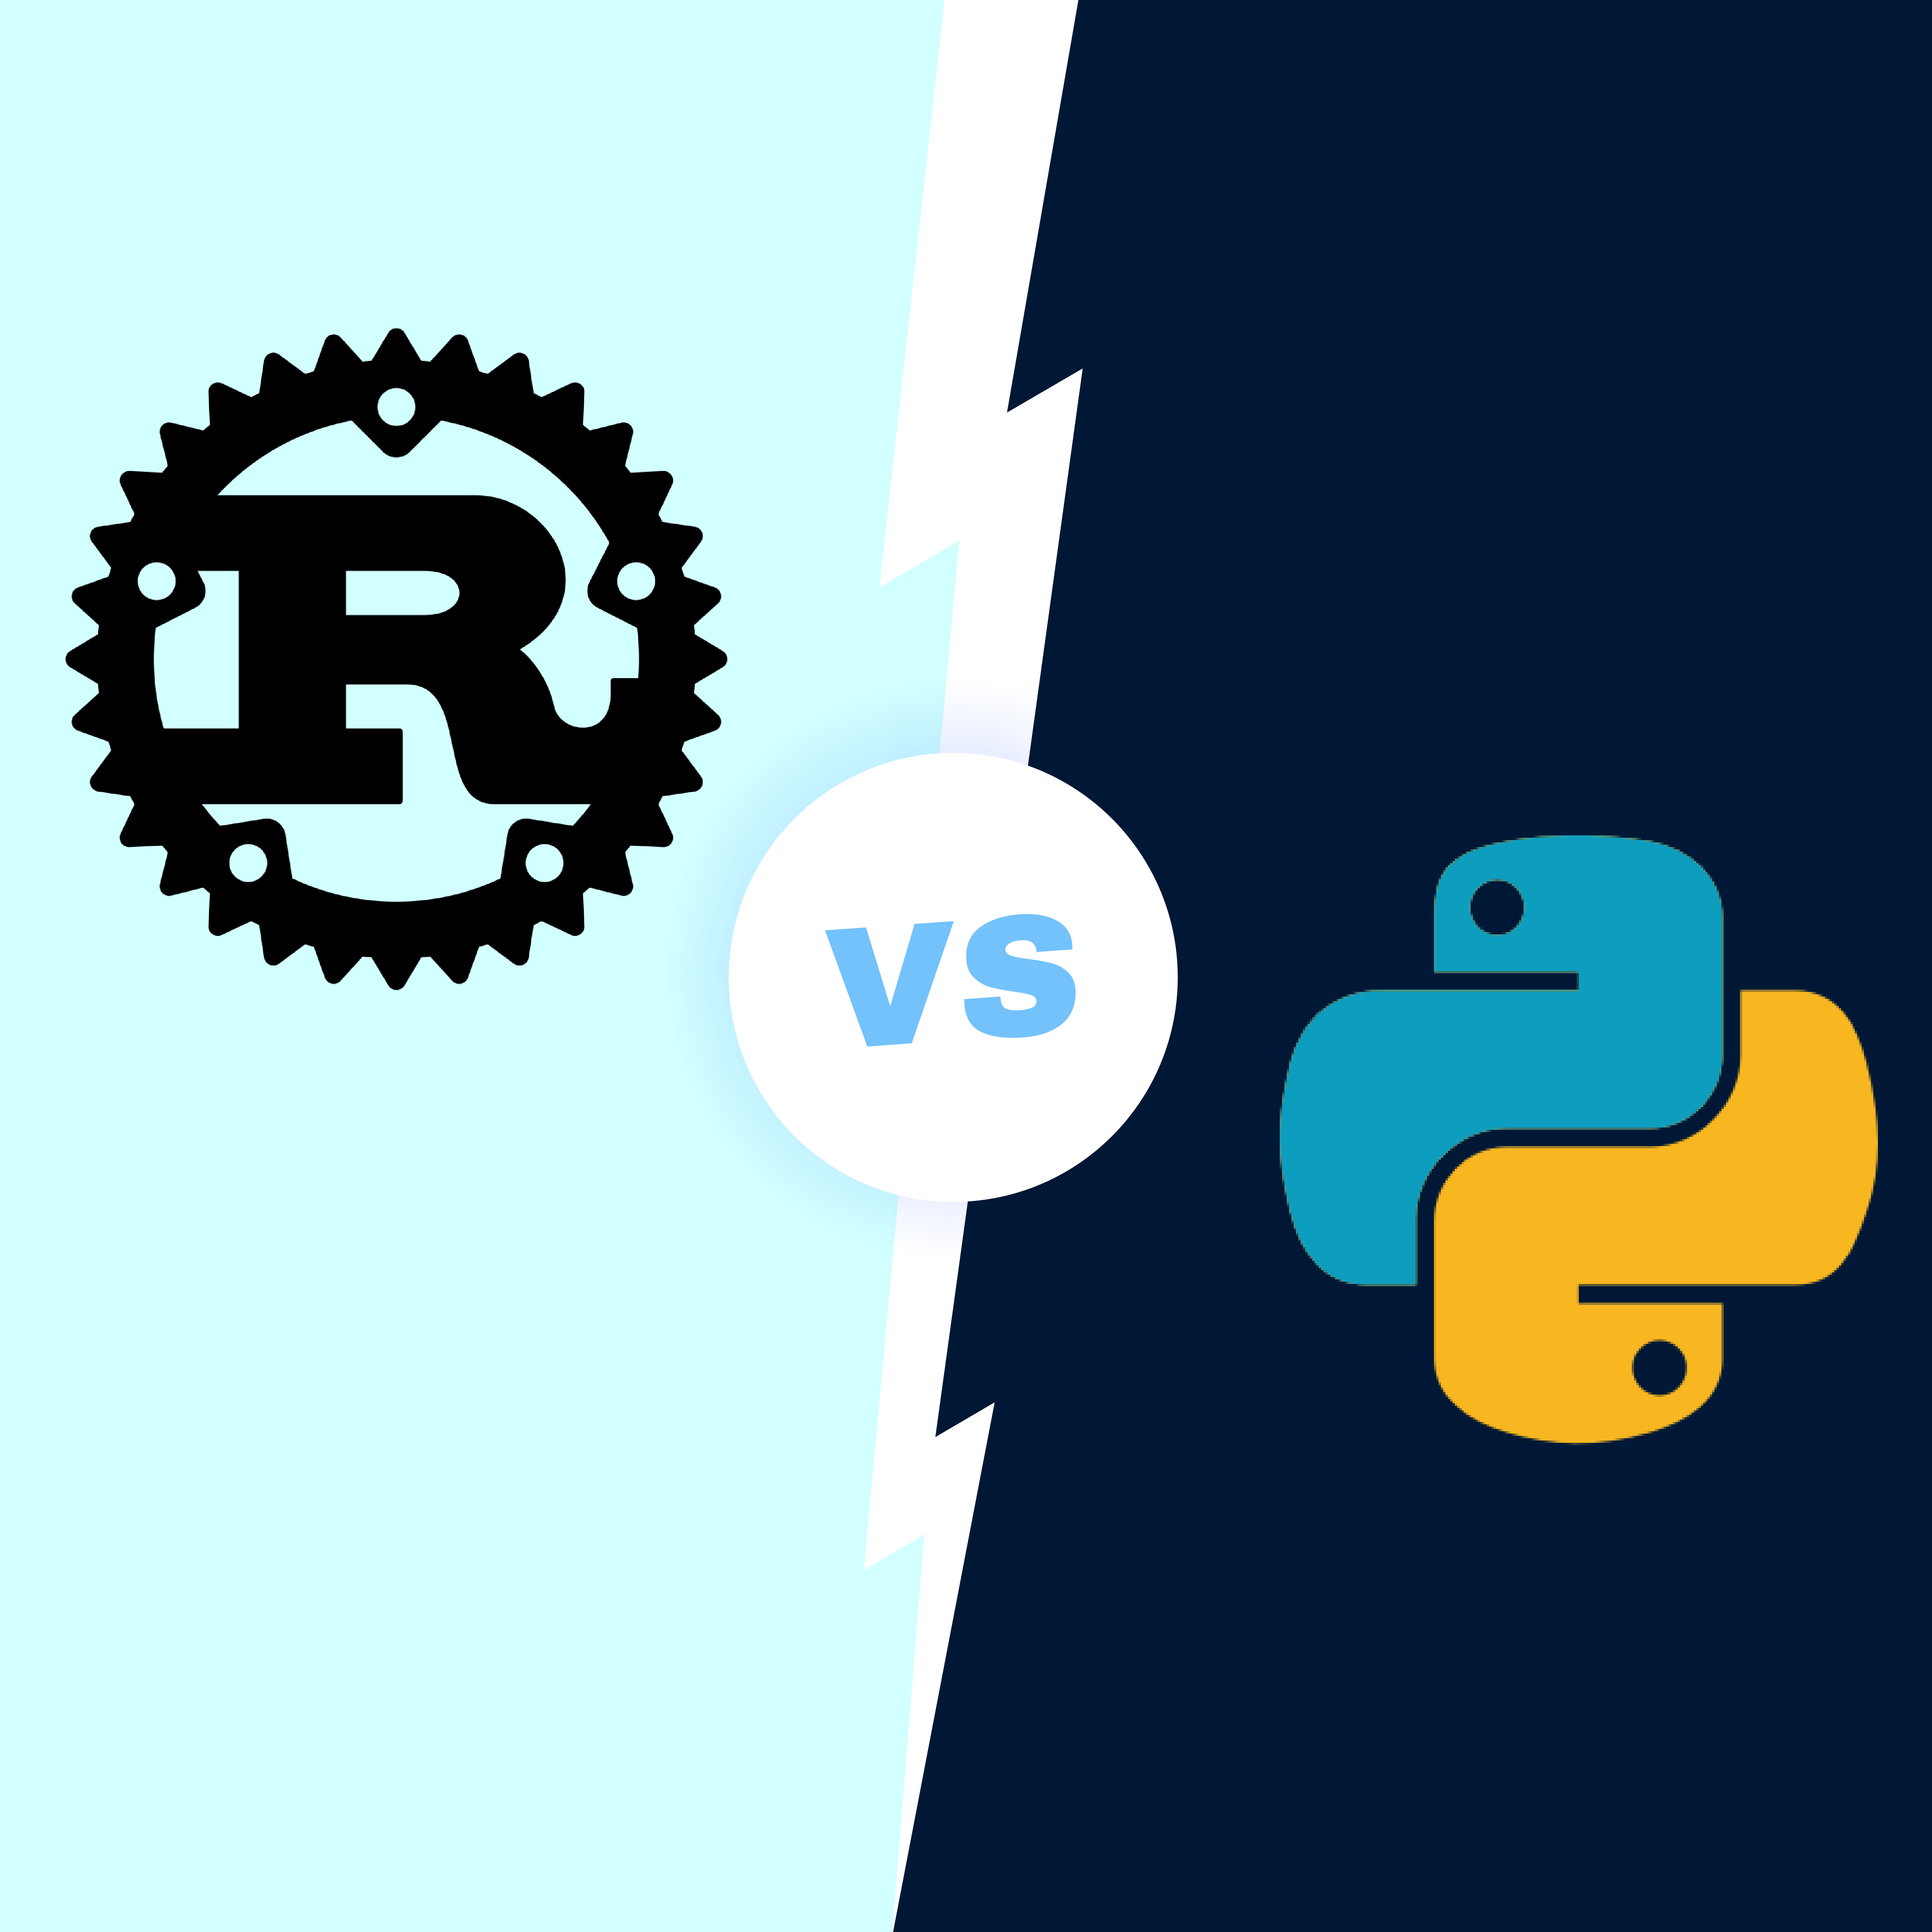 Rust Vs Python: Which Language is Better For Building a Twitter-Like Application?